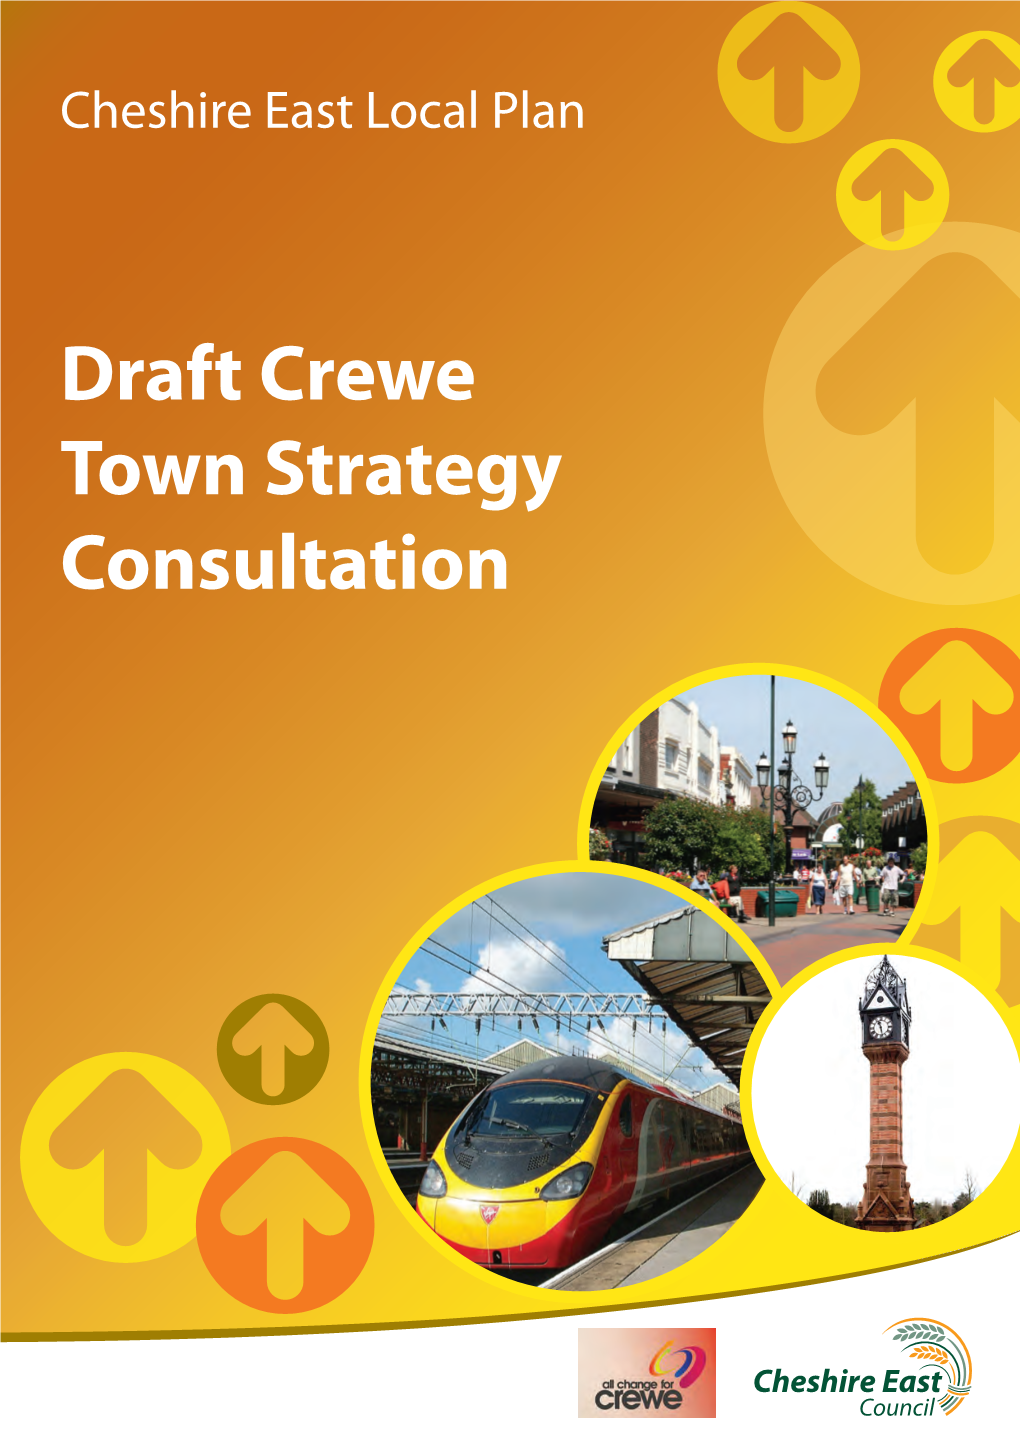 Crewe Town Strategy Consultation Just As People Make Plans, Towns Need to Make Plans Too…